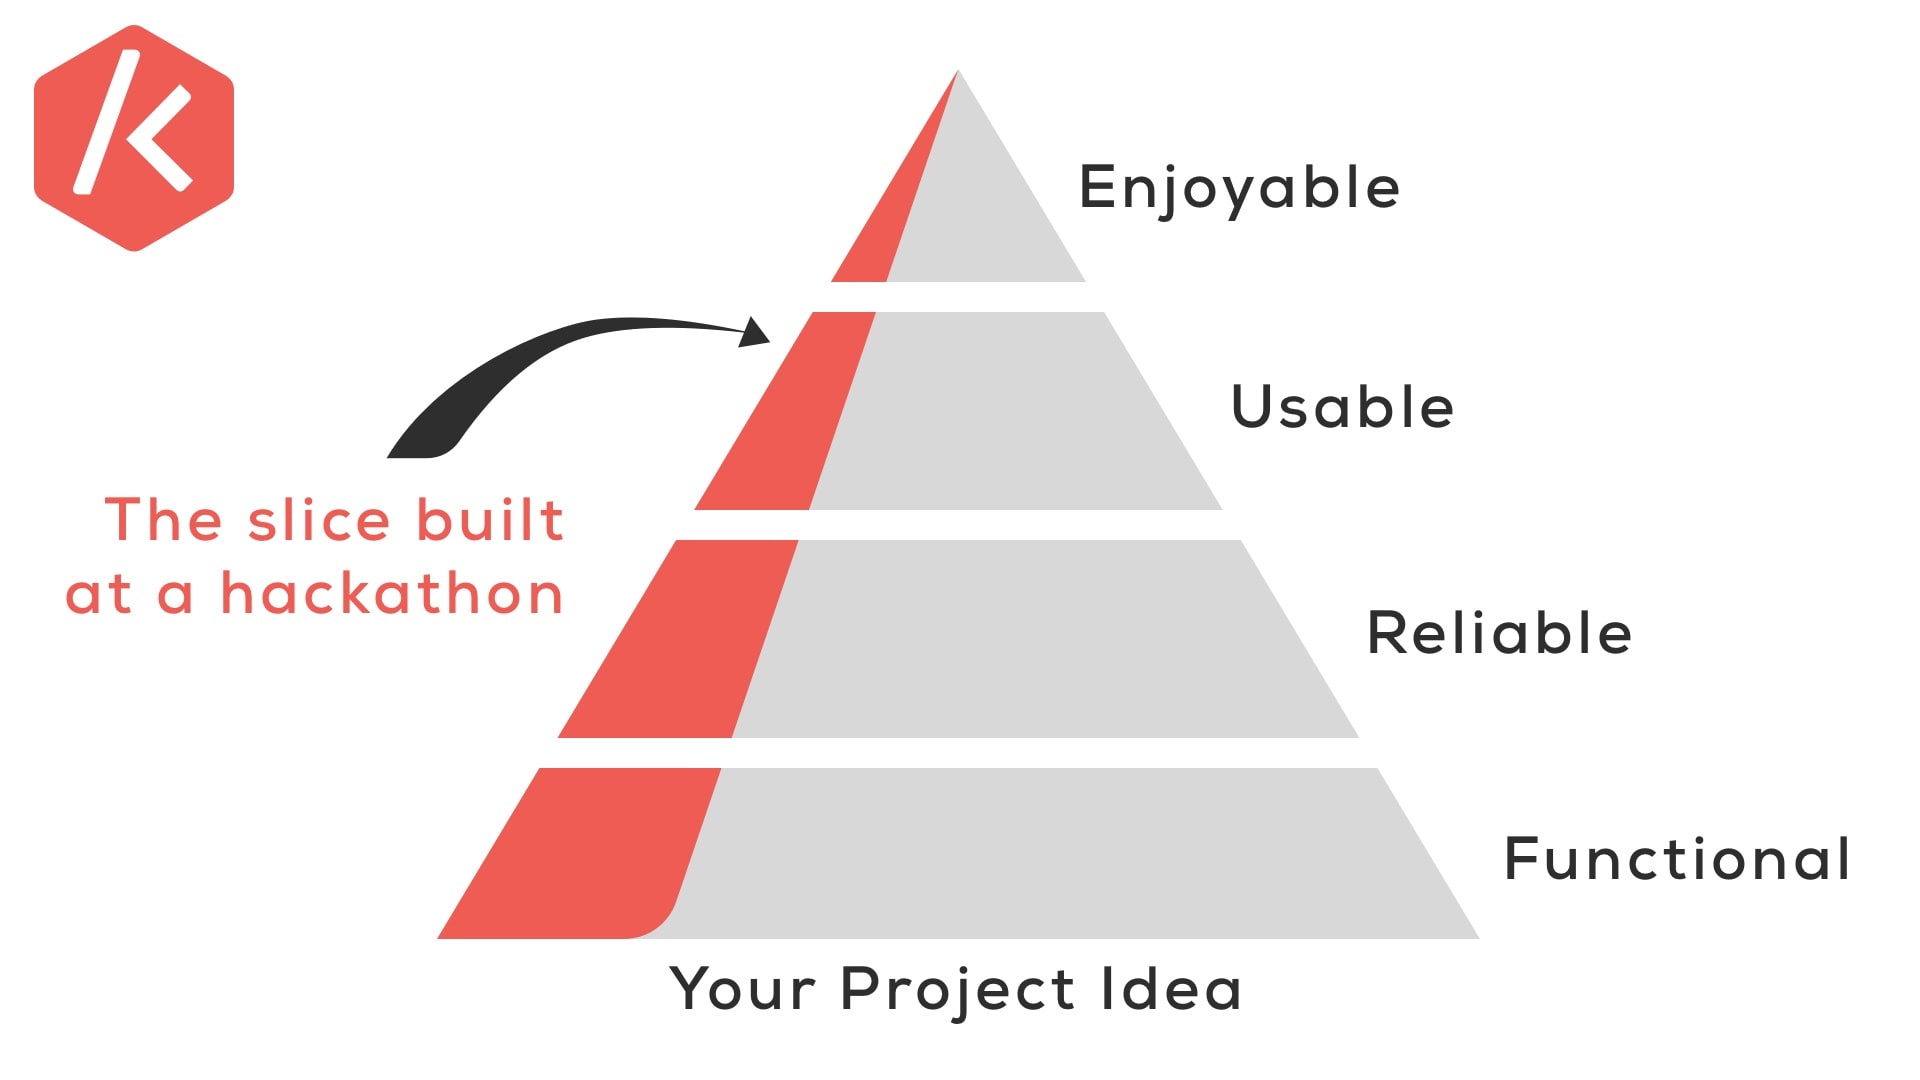 Enjoyable, Useable, Reliable, Functional. Make sure your hackathon project is all four of these things.